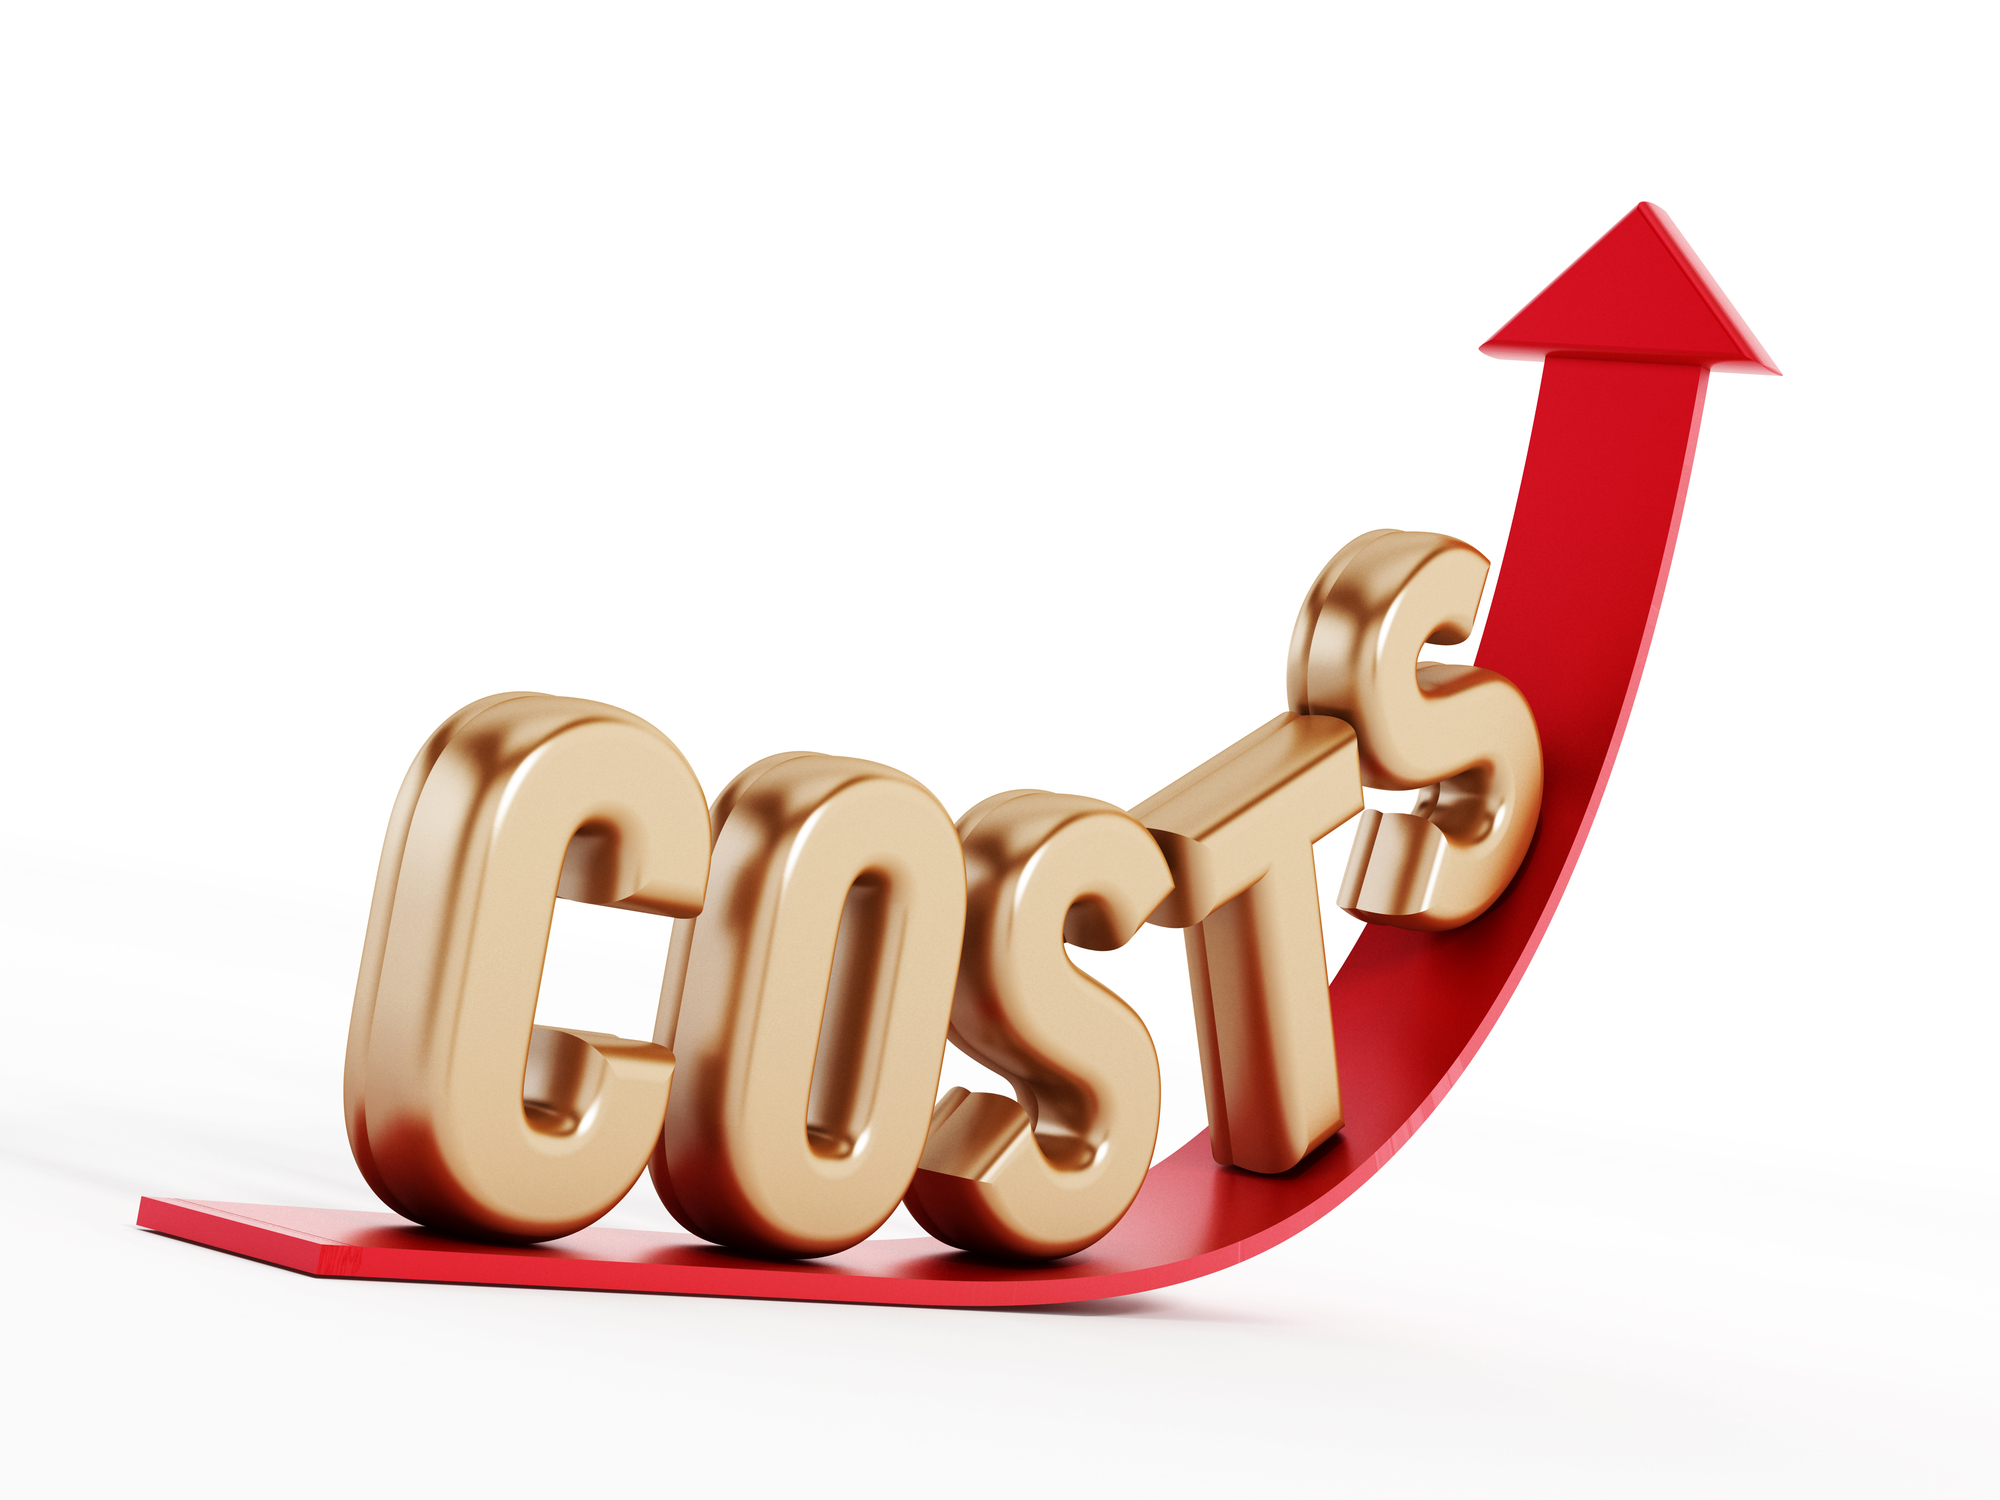 Preparing for Economic Changes - Added Costs of Doing Business